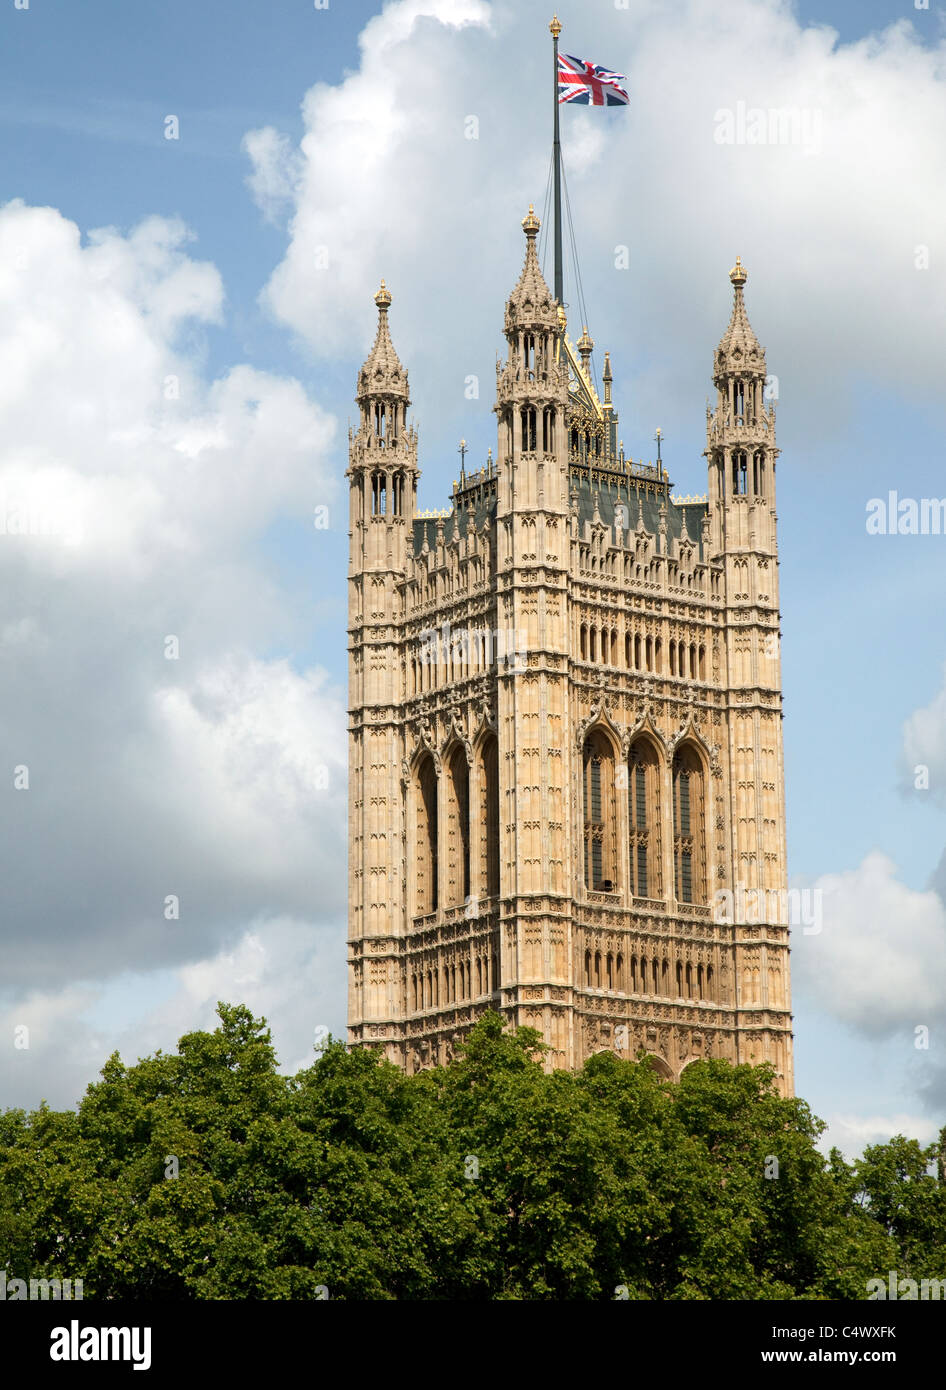 Victoria Tower, Houses of Parliament, London Stockfoto